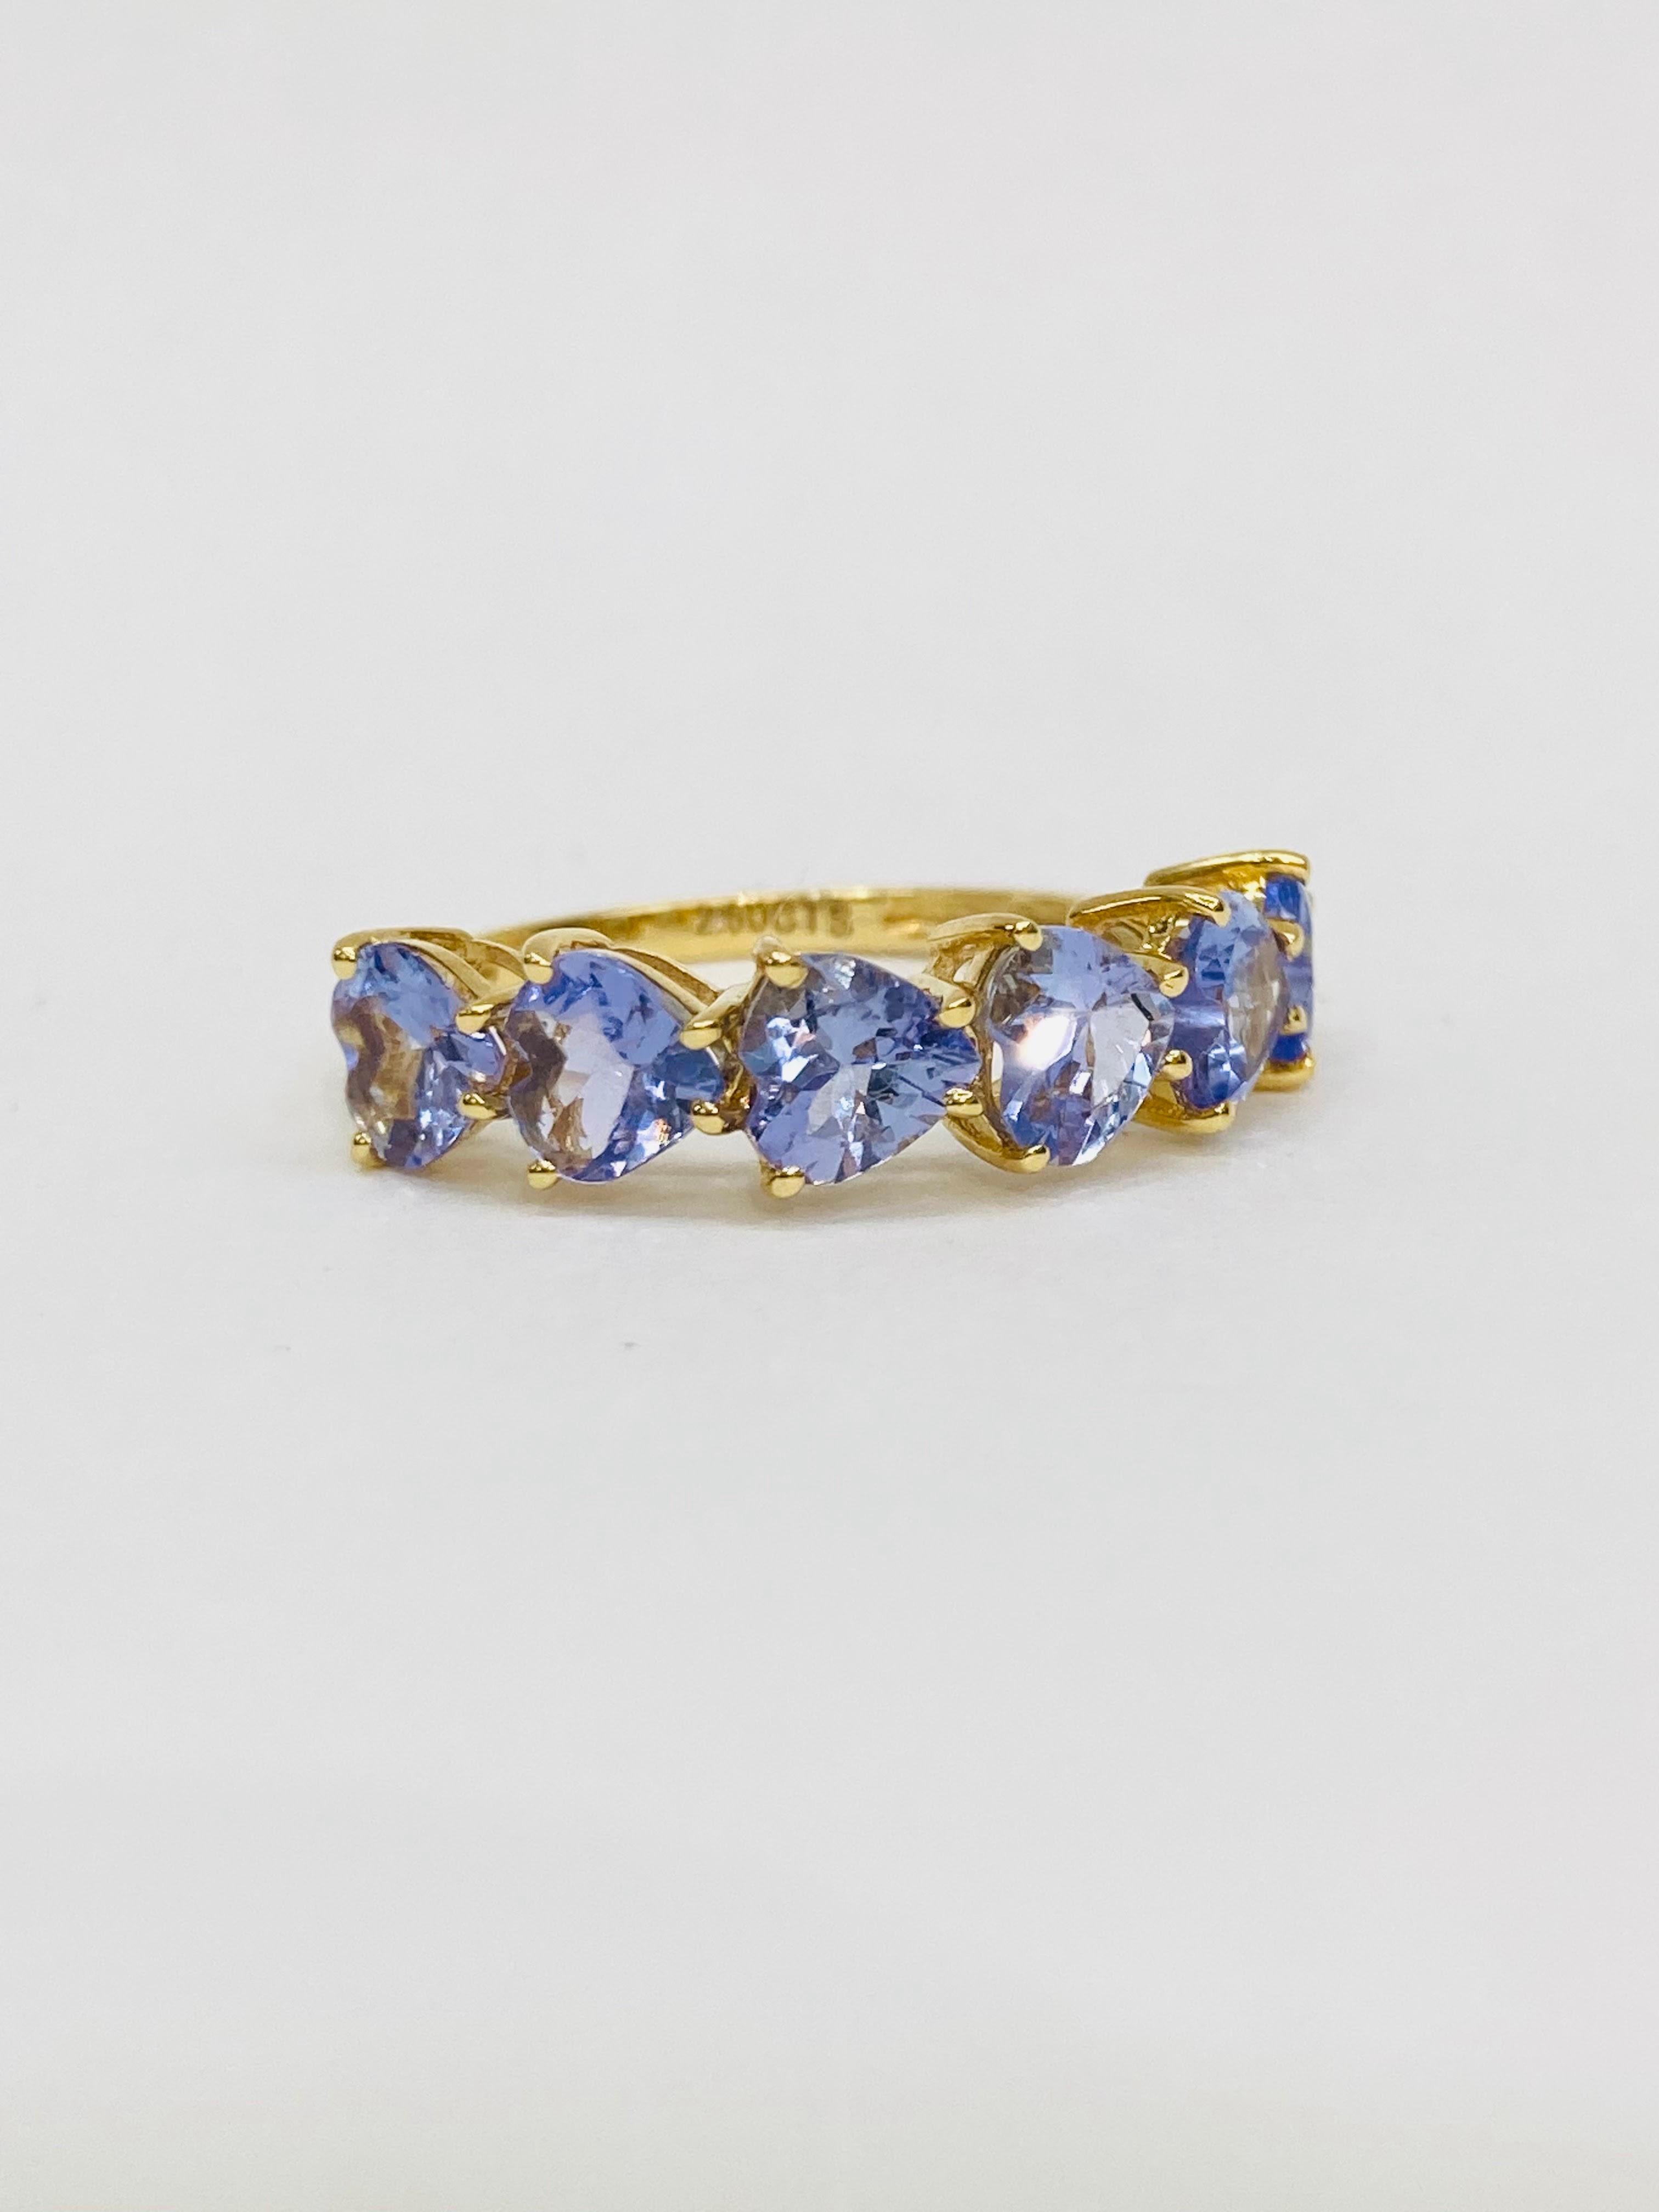 Bochic “Vintage Retro” Eternity 18K Gold Rind, Heart Shape Purple Tanzanite

Natural Tanzanite Heart Shape Gems from Tanzania 
2.50 Carat 
Yellow Gold 

This Ring is from the 